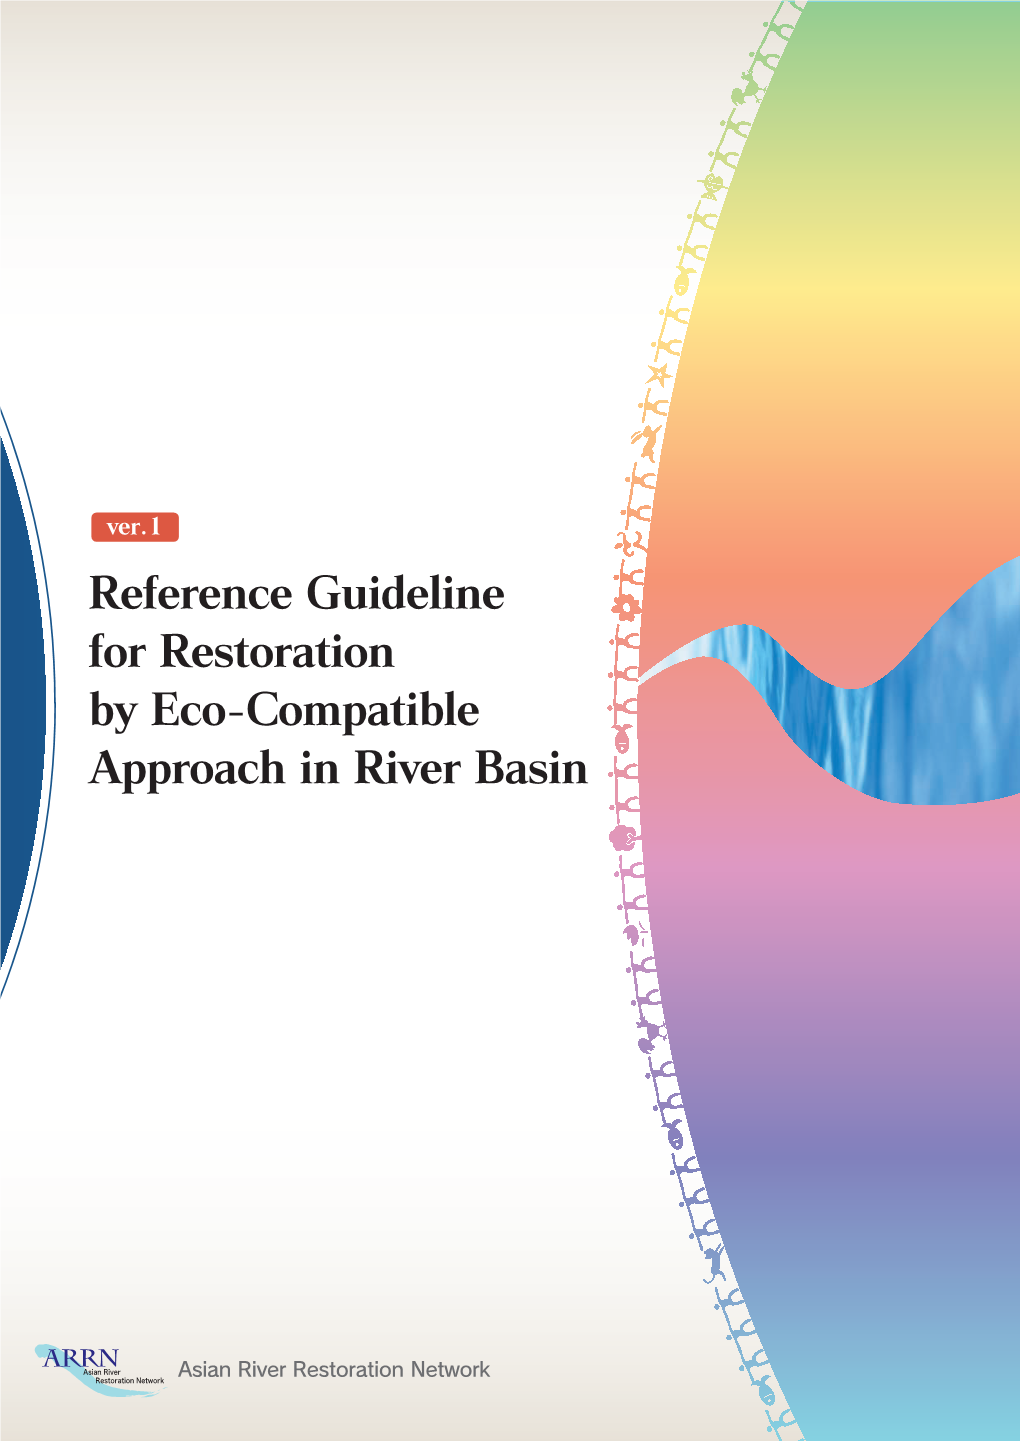 Reference Guideline for Restoration by Eco-Compatible Approach in River Basin